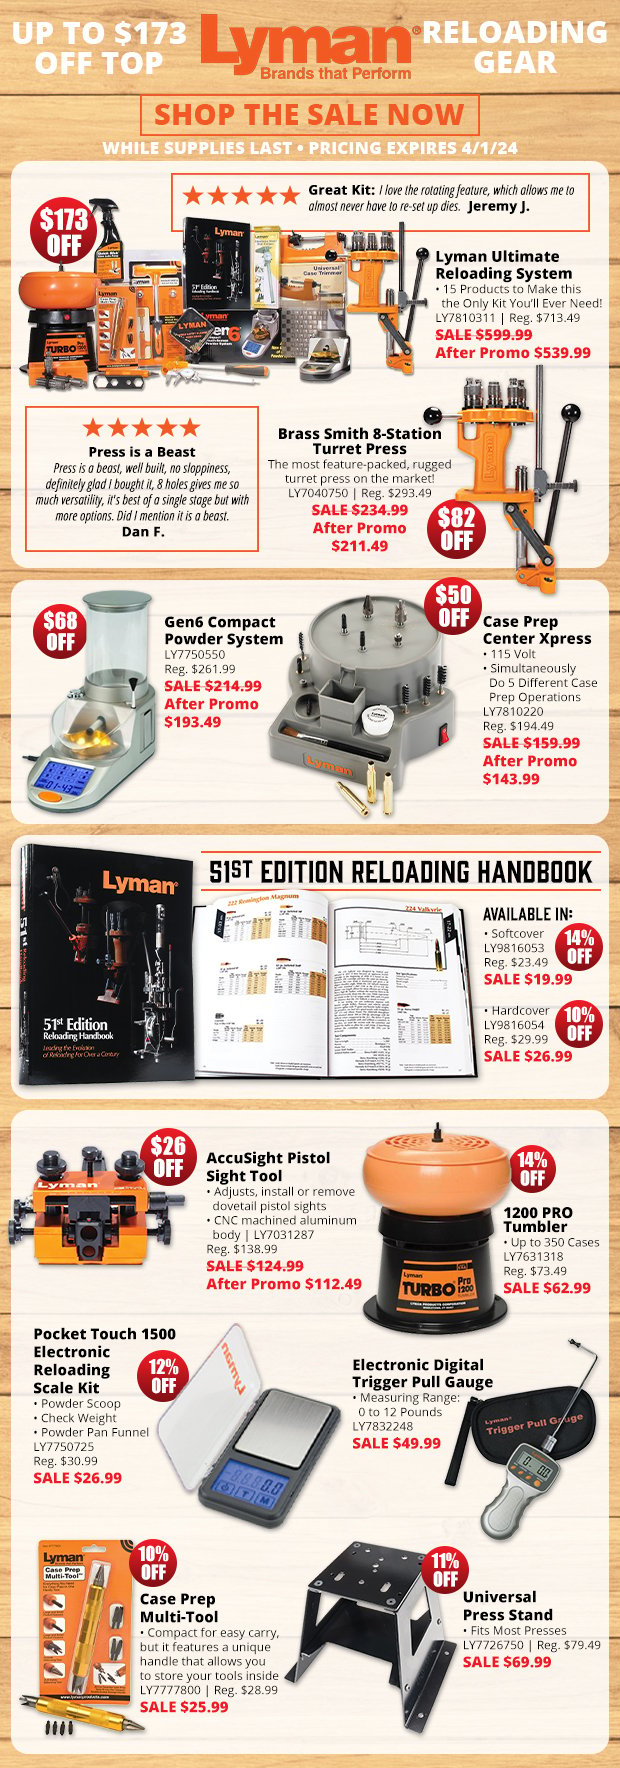 Up to $173 Off Top Lyman Reloading Gear